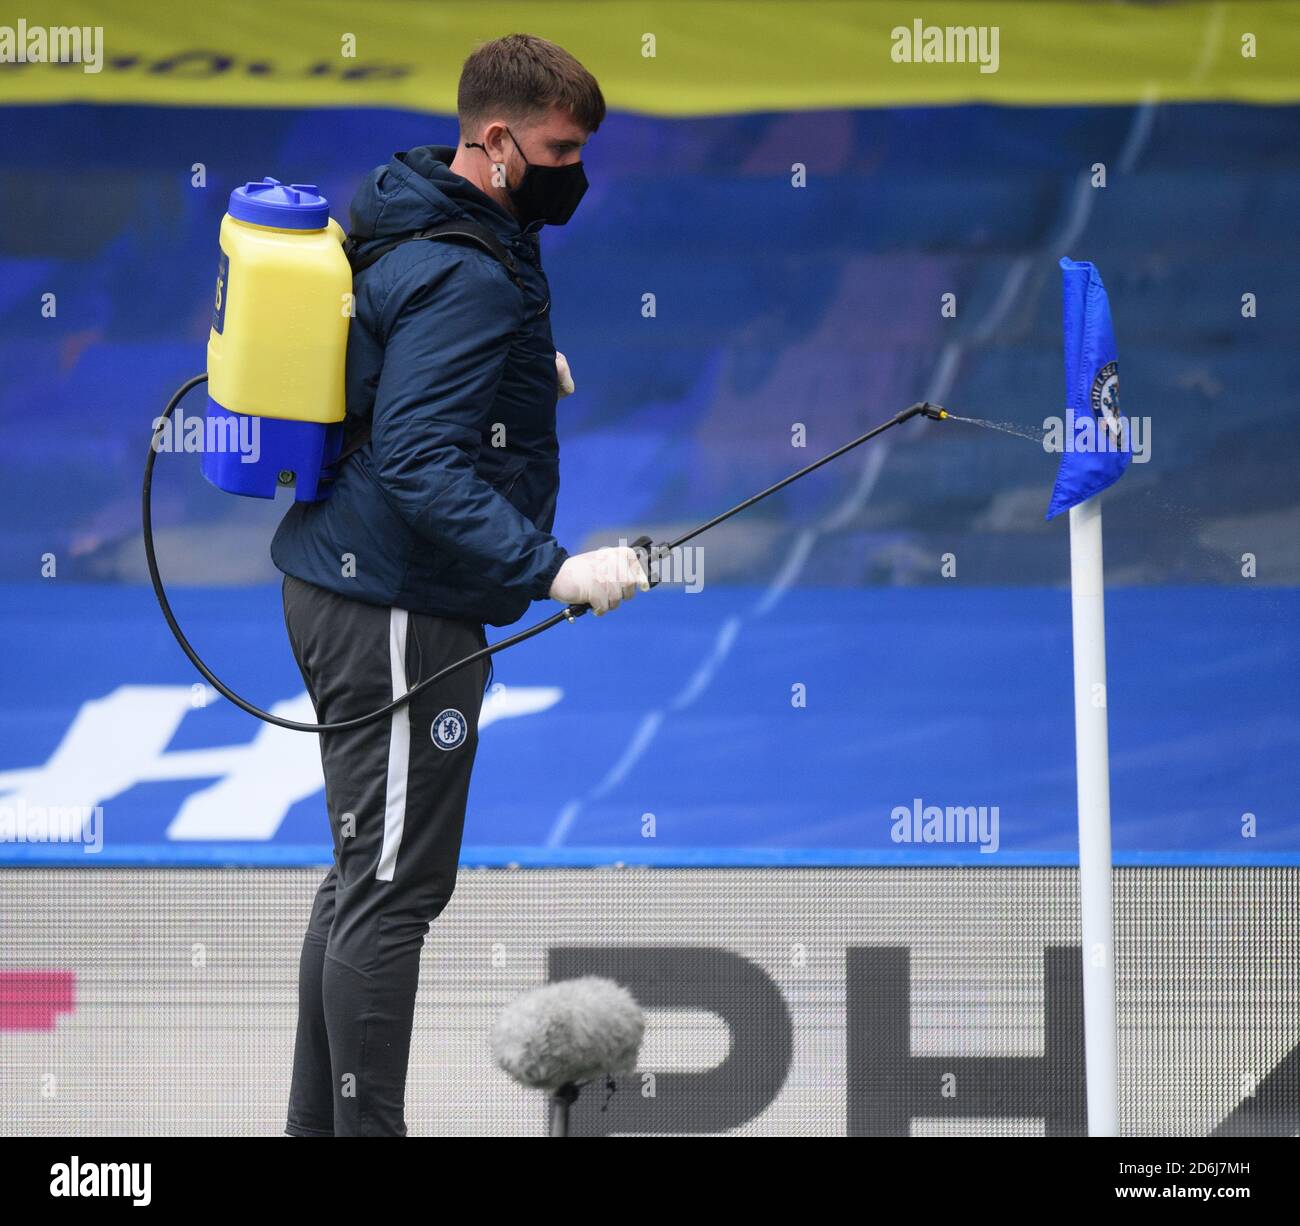 London, England, 17th Oct 2020  An offical sprays the corner flag with disinfectant as an anti Covid 19 measure  Chelsea v Southampton.  Premier League. Credit : Mark Pain / Alamy Live News Stock Photo